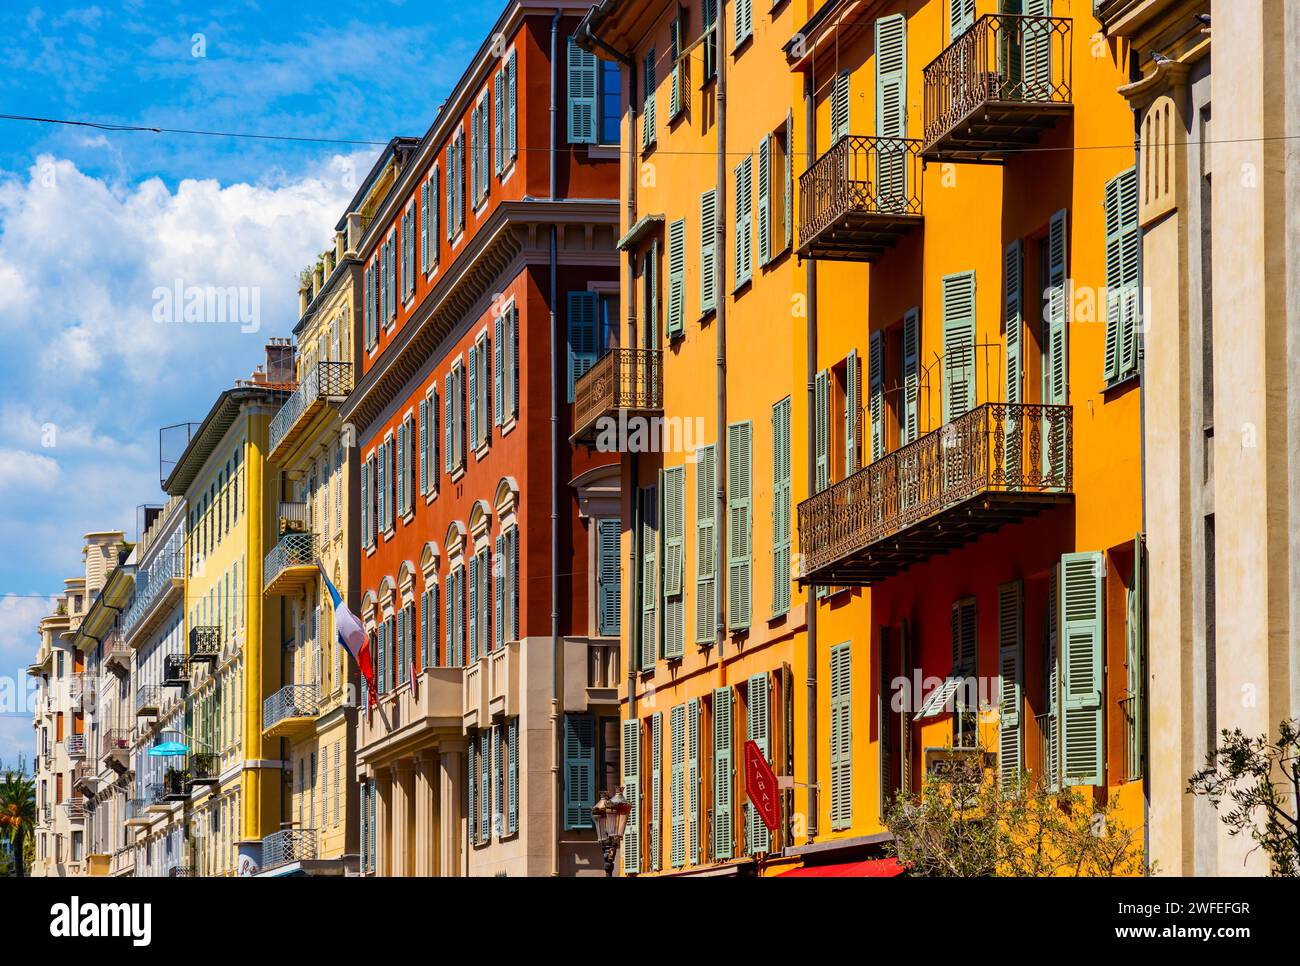 Nice, France - August 7, 2022: Colorful tenement houses along Rue Saint Francois de Paule street in historic Vieux Vieille Ville old town of Nice on F Stock Photo